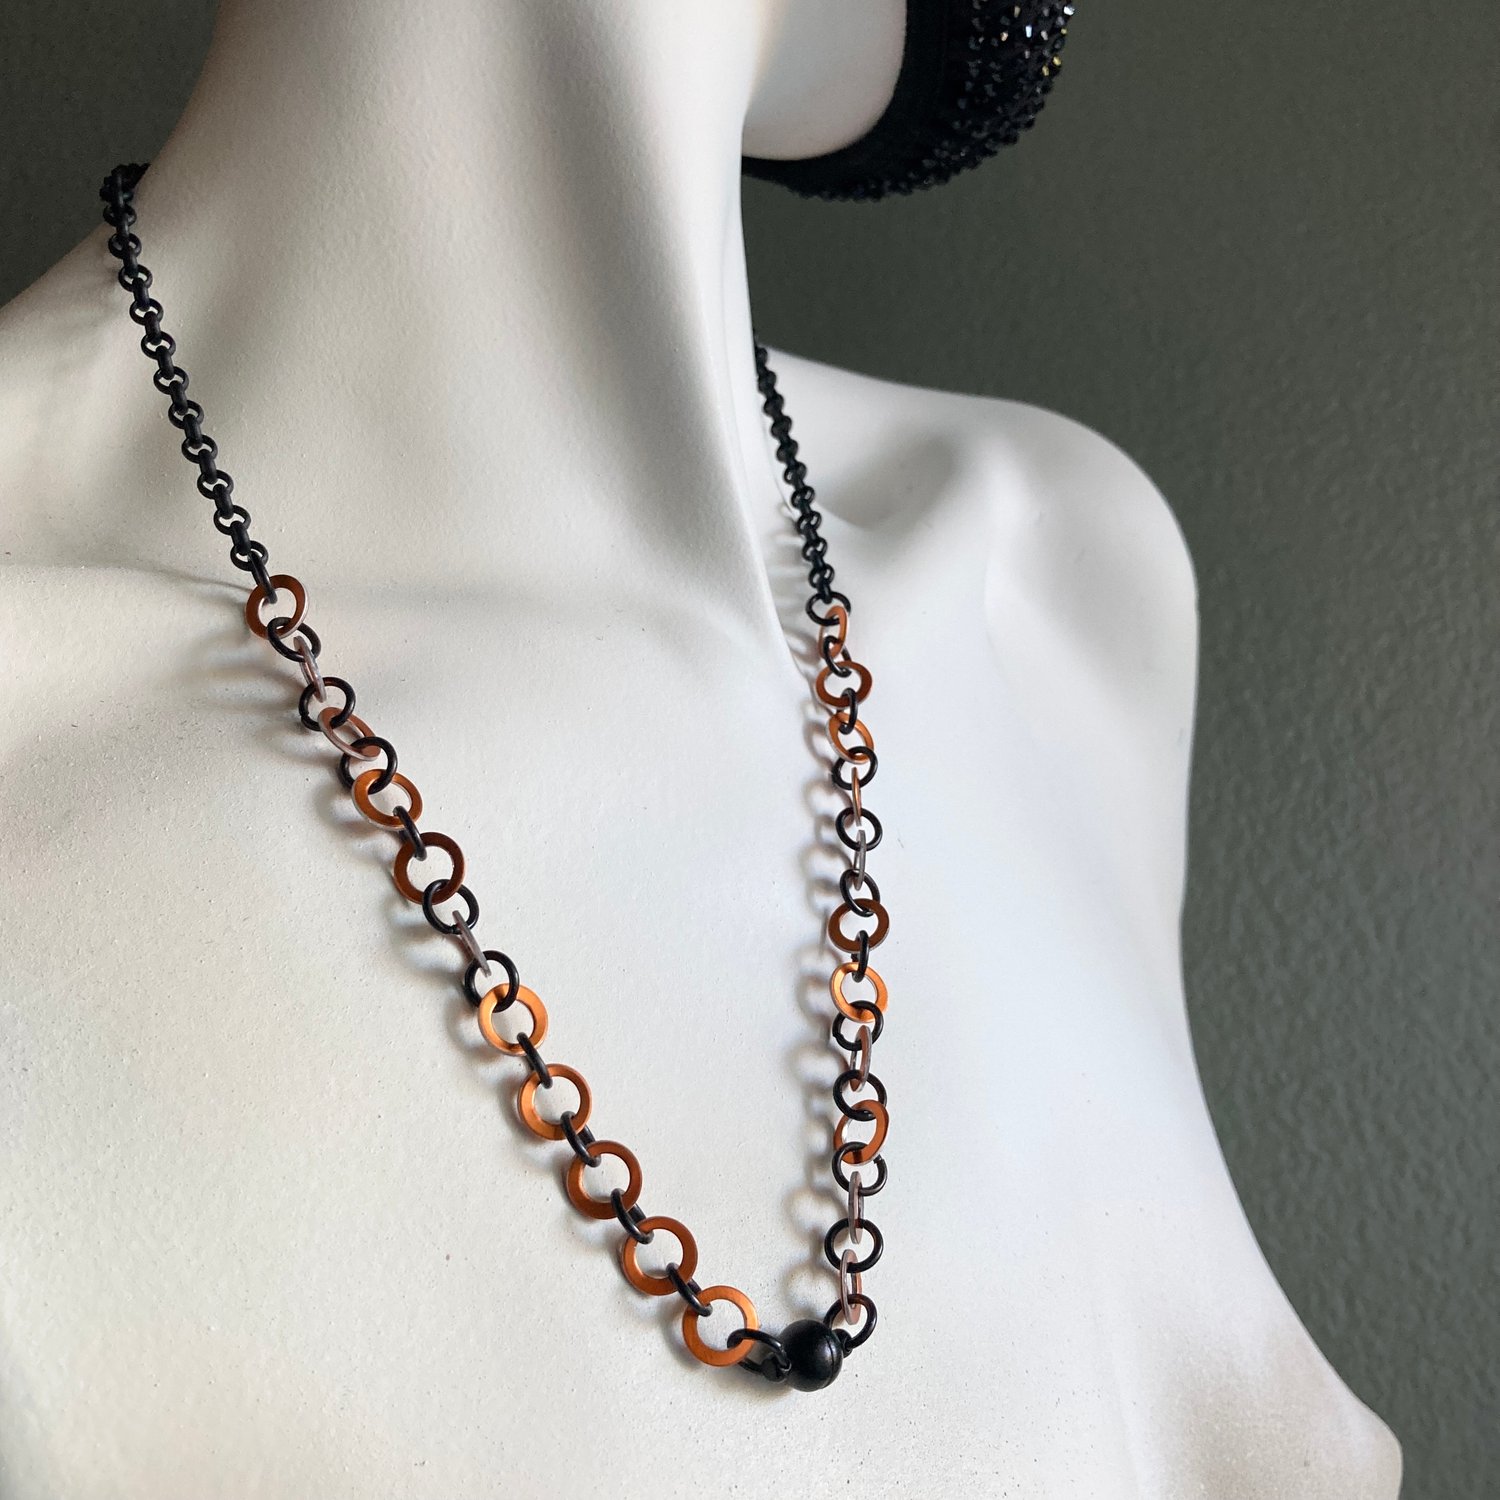 Image of 22" Matte Black & Orange Convertible Necklace/Eyeglass Chain with Matte Black Ball Magnet Clasp